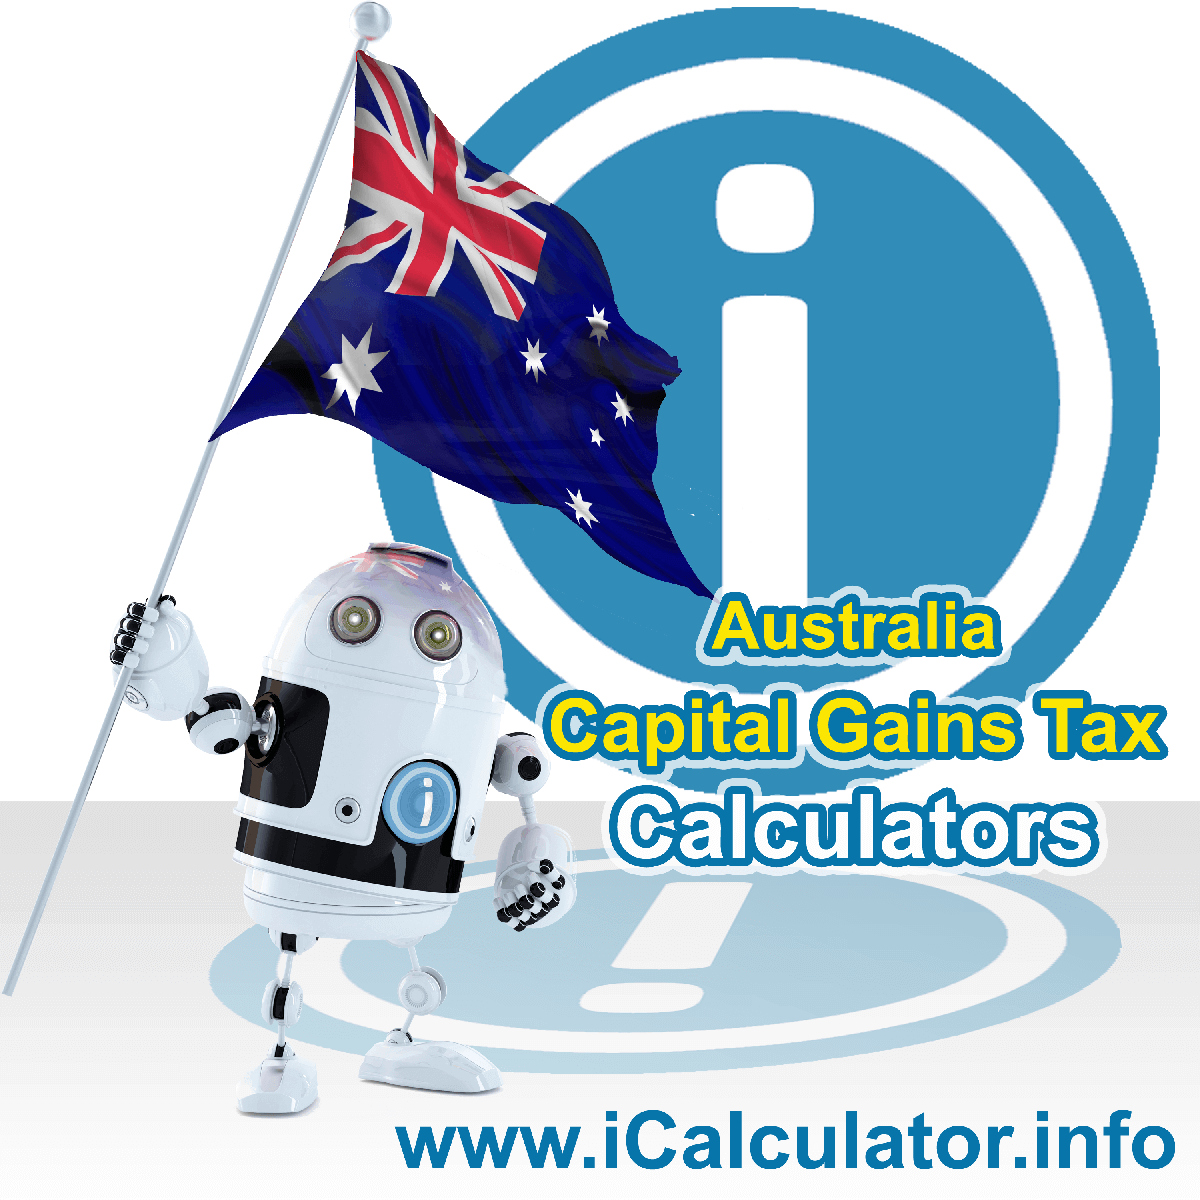 Australia Capital Gains Tax Calculator. This image shows the Australia flag and information relating to the capital gains tax formula used for calculating capital gains tax for individuals, corporations and small business in Australia using the Australia Capital Gains Tax Calculator in 2023